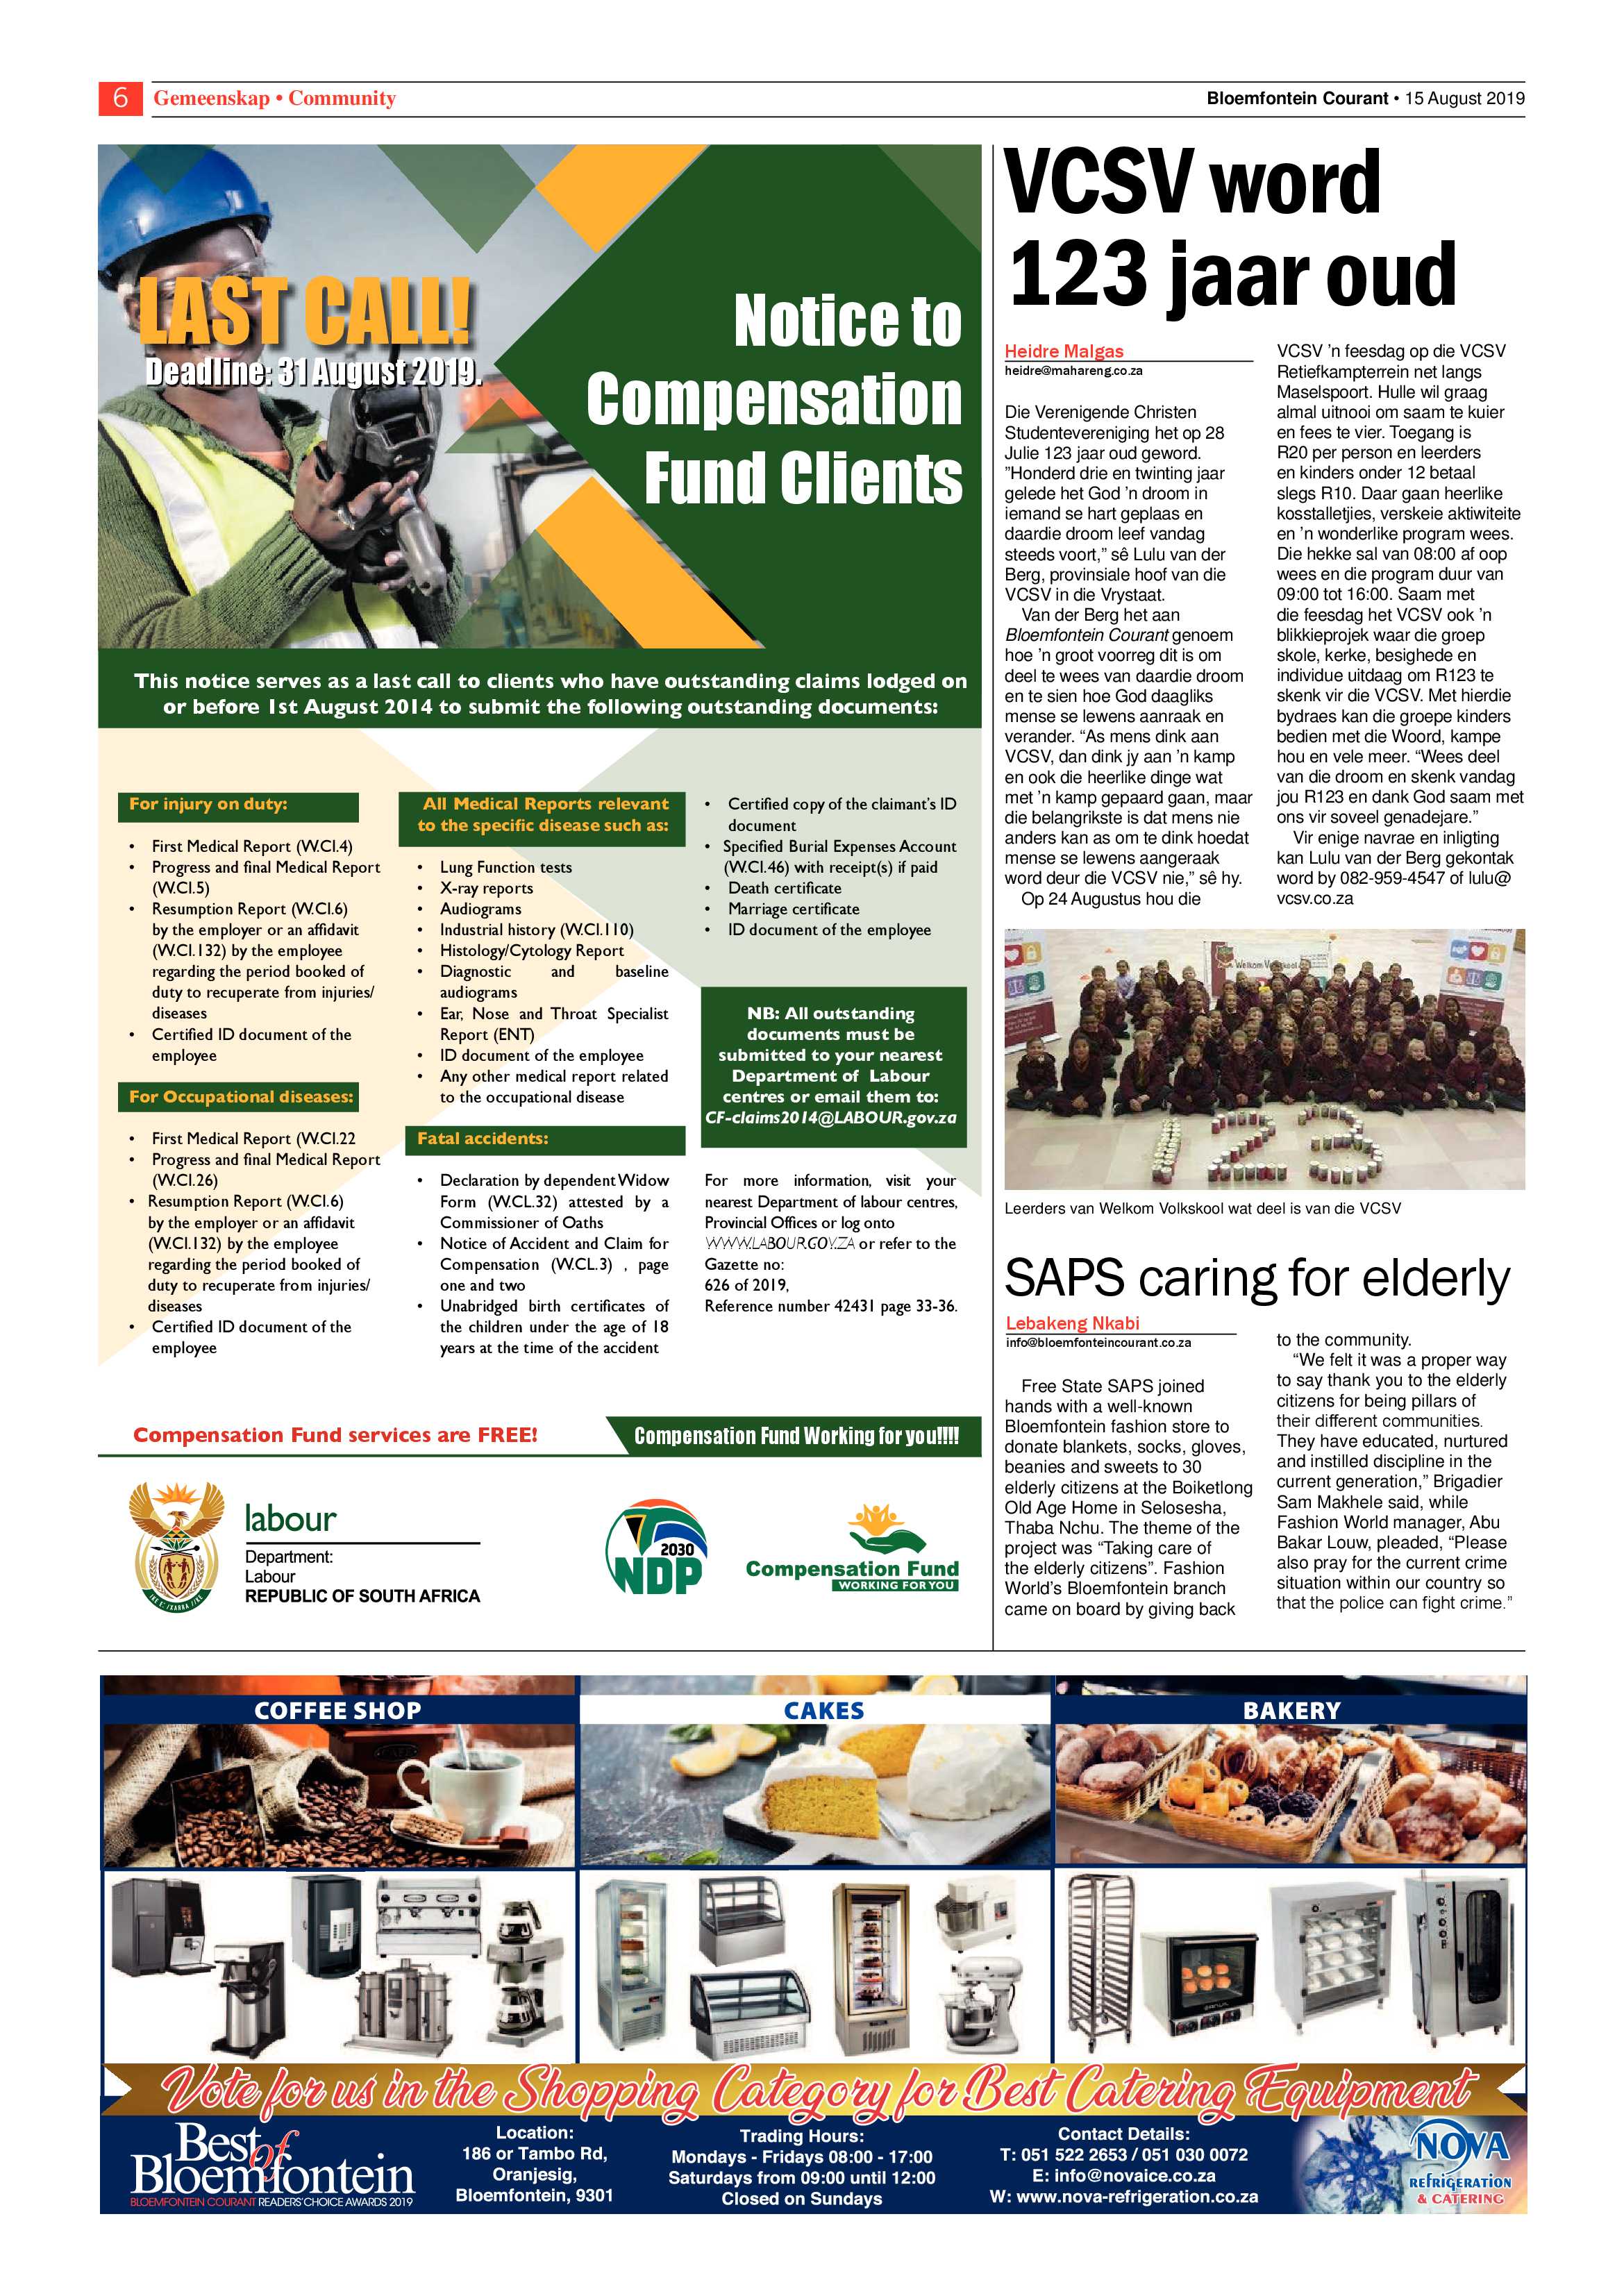 courant-15-august-2019-epapers-page-6